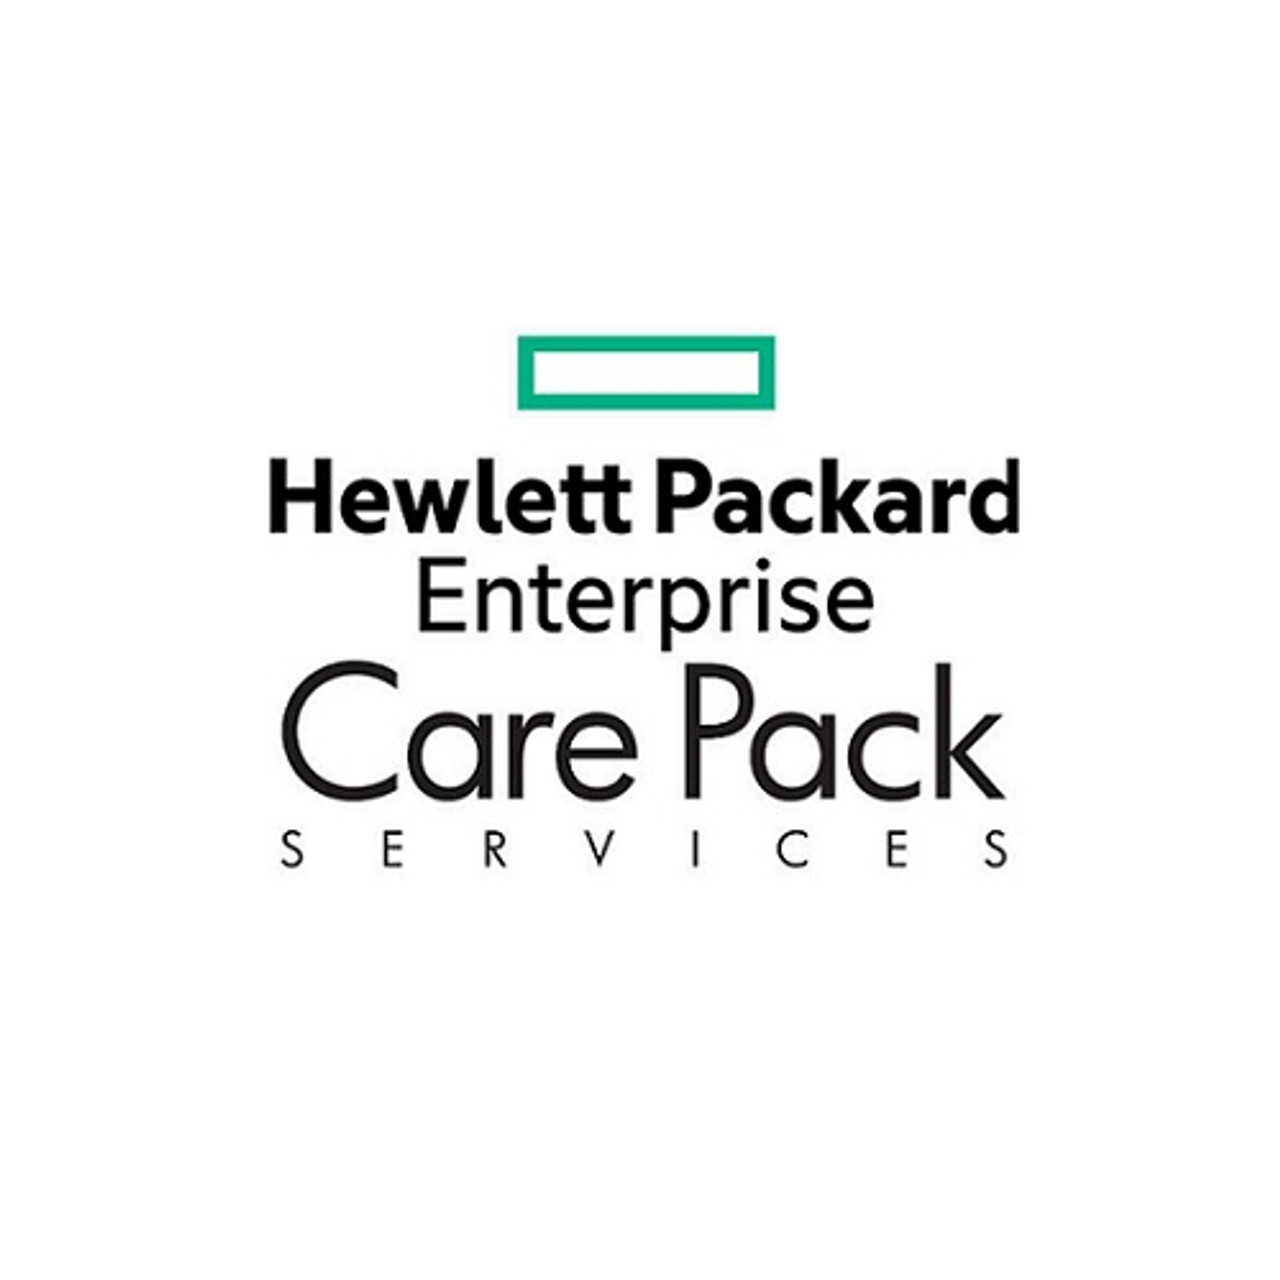 HPE 1 Year Ren Foundation Care, 24x7 HPE 5510 24G PoE+ Service